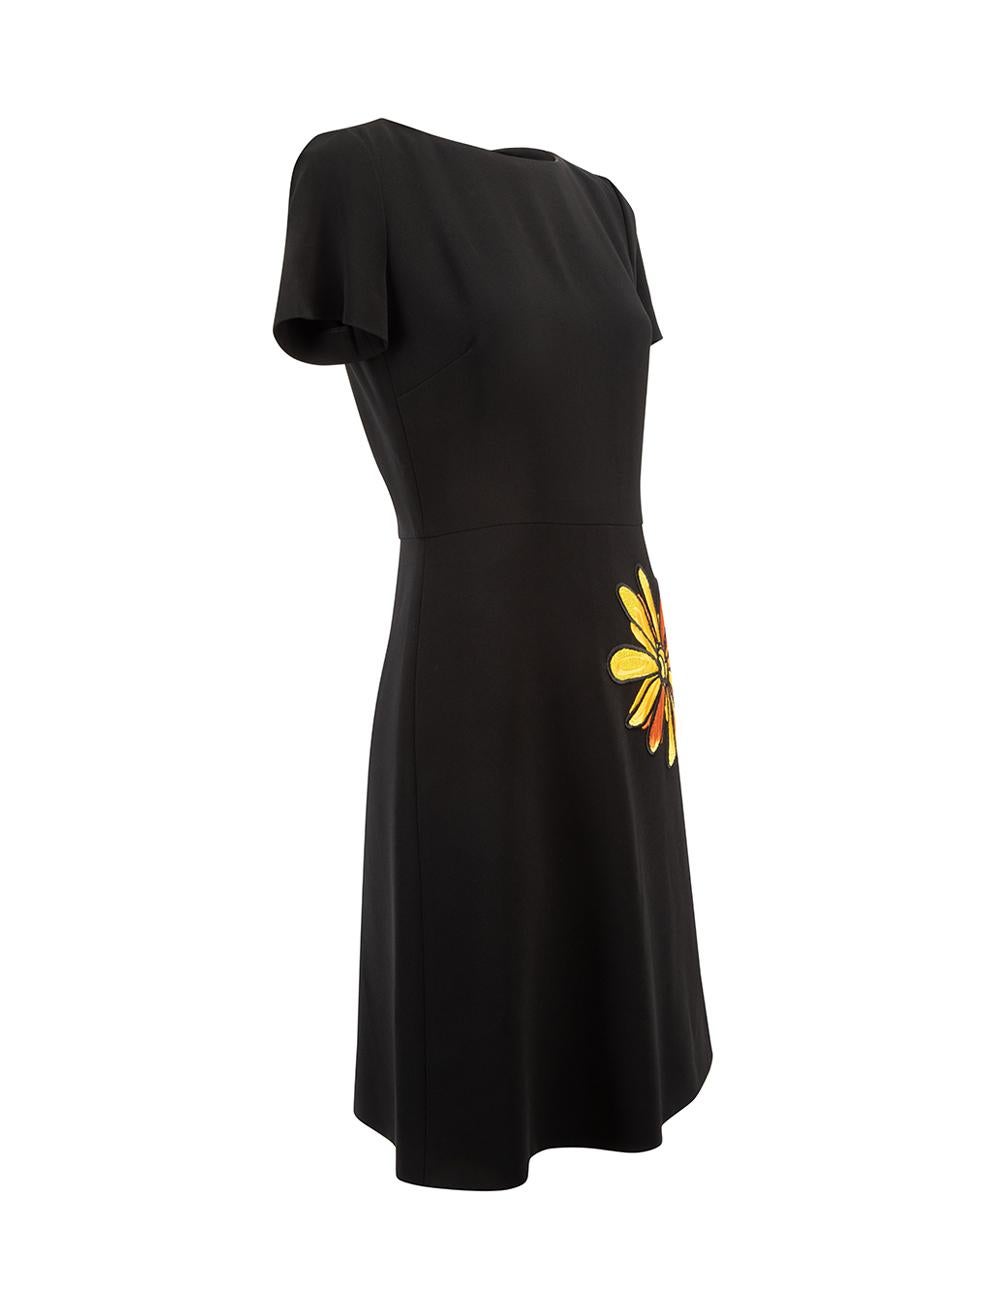 CONDITION is Very good. Hardly any visible wear to dress is evident on this used Boutique Moschino designer resale item. 



Details


Black

Synthetic

Mini dress

Round neckline

Flower embroidered detail

Back zip closure





Made in